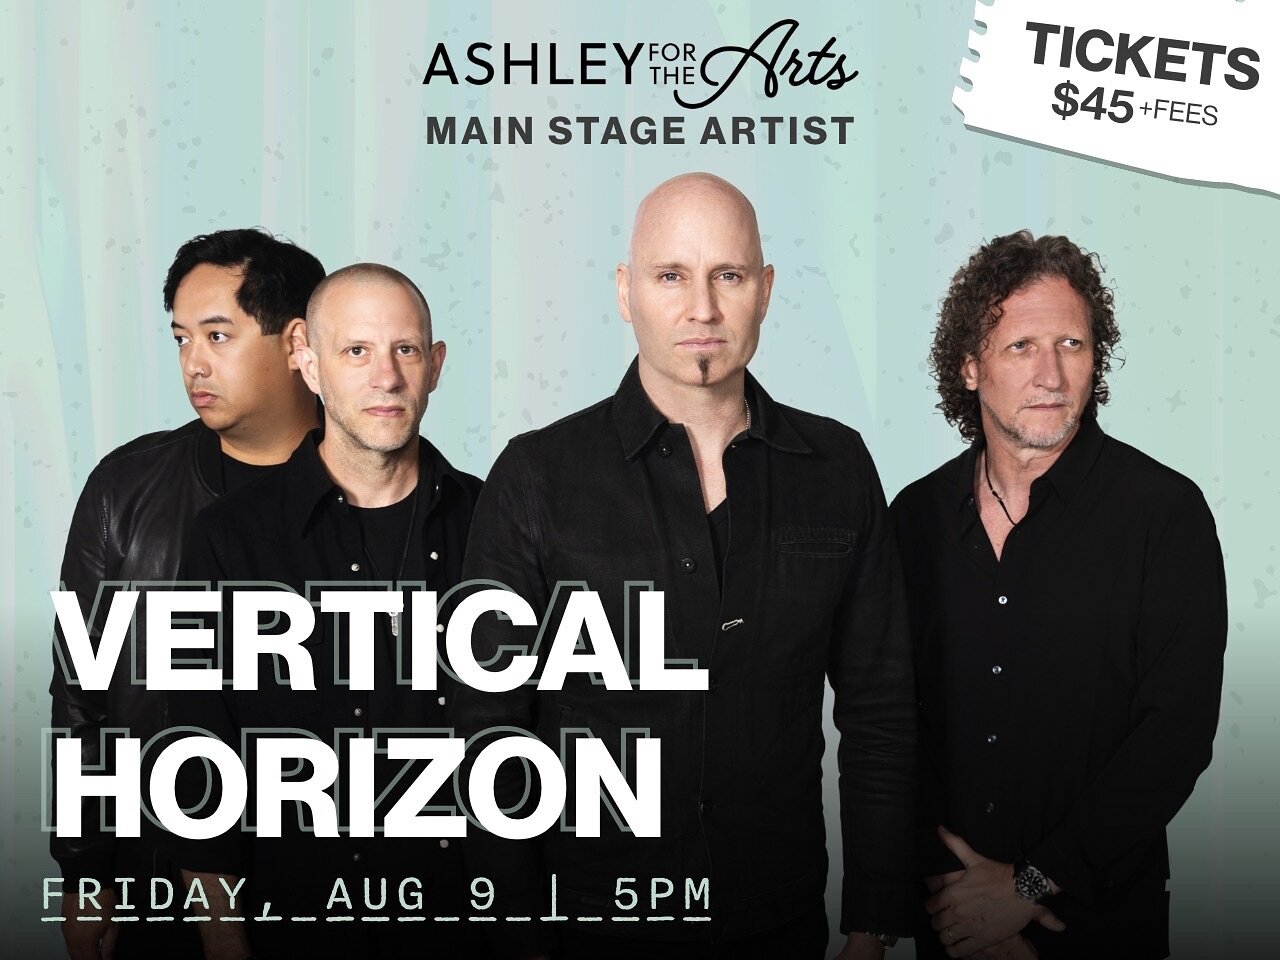 Arcadia, Wisconsin! Join us at @ashleyforthearts on Friday, August 9 &mdash; We can&rsquo;t wait to rock out with you!

Tickets are on sale now! Link in bio.